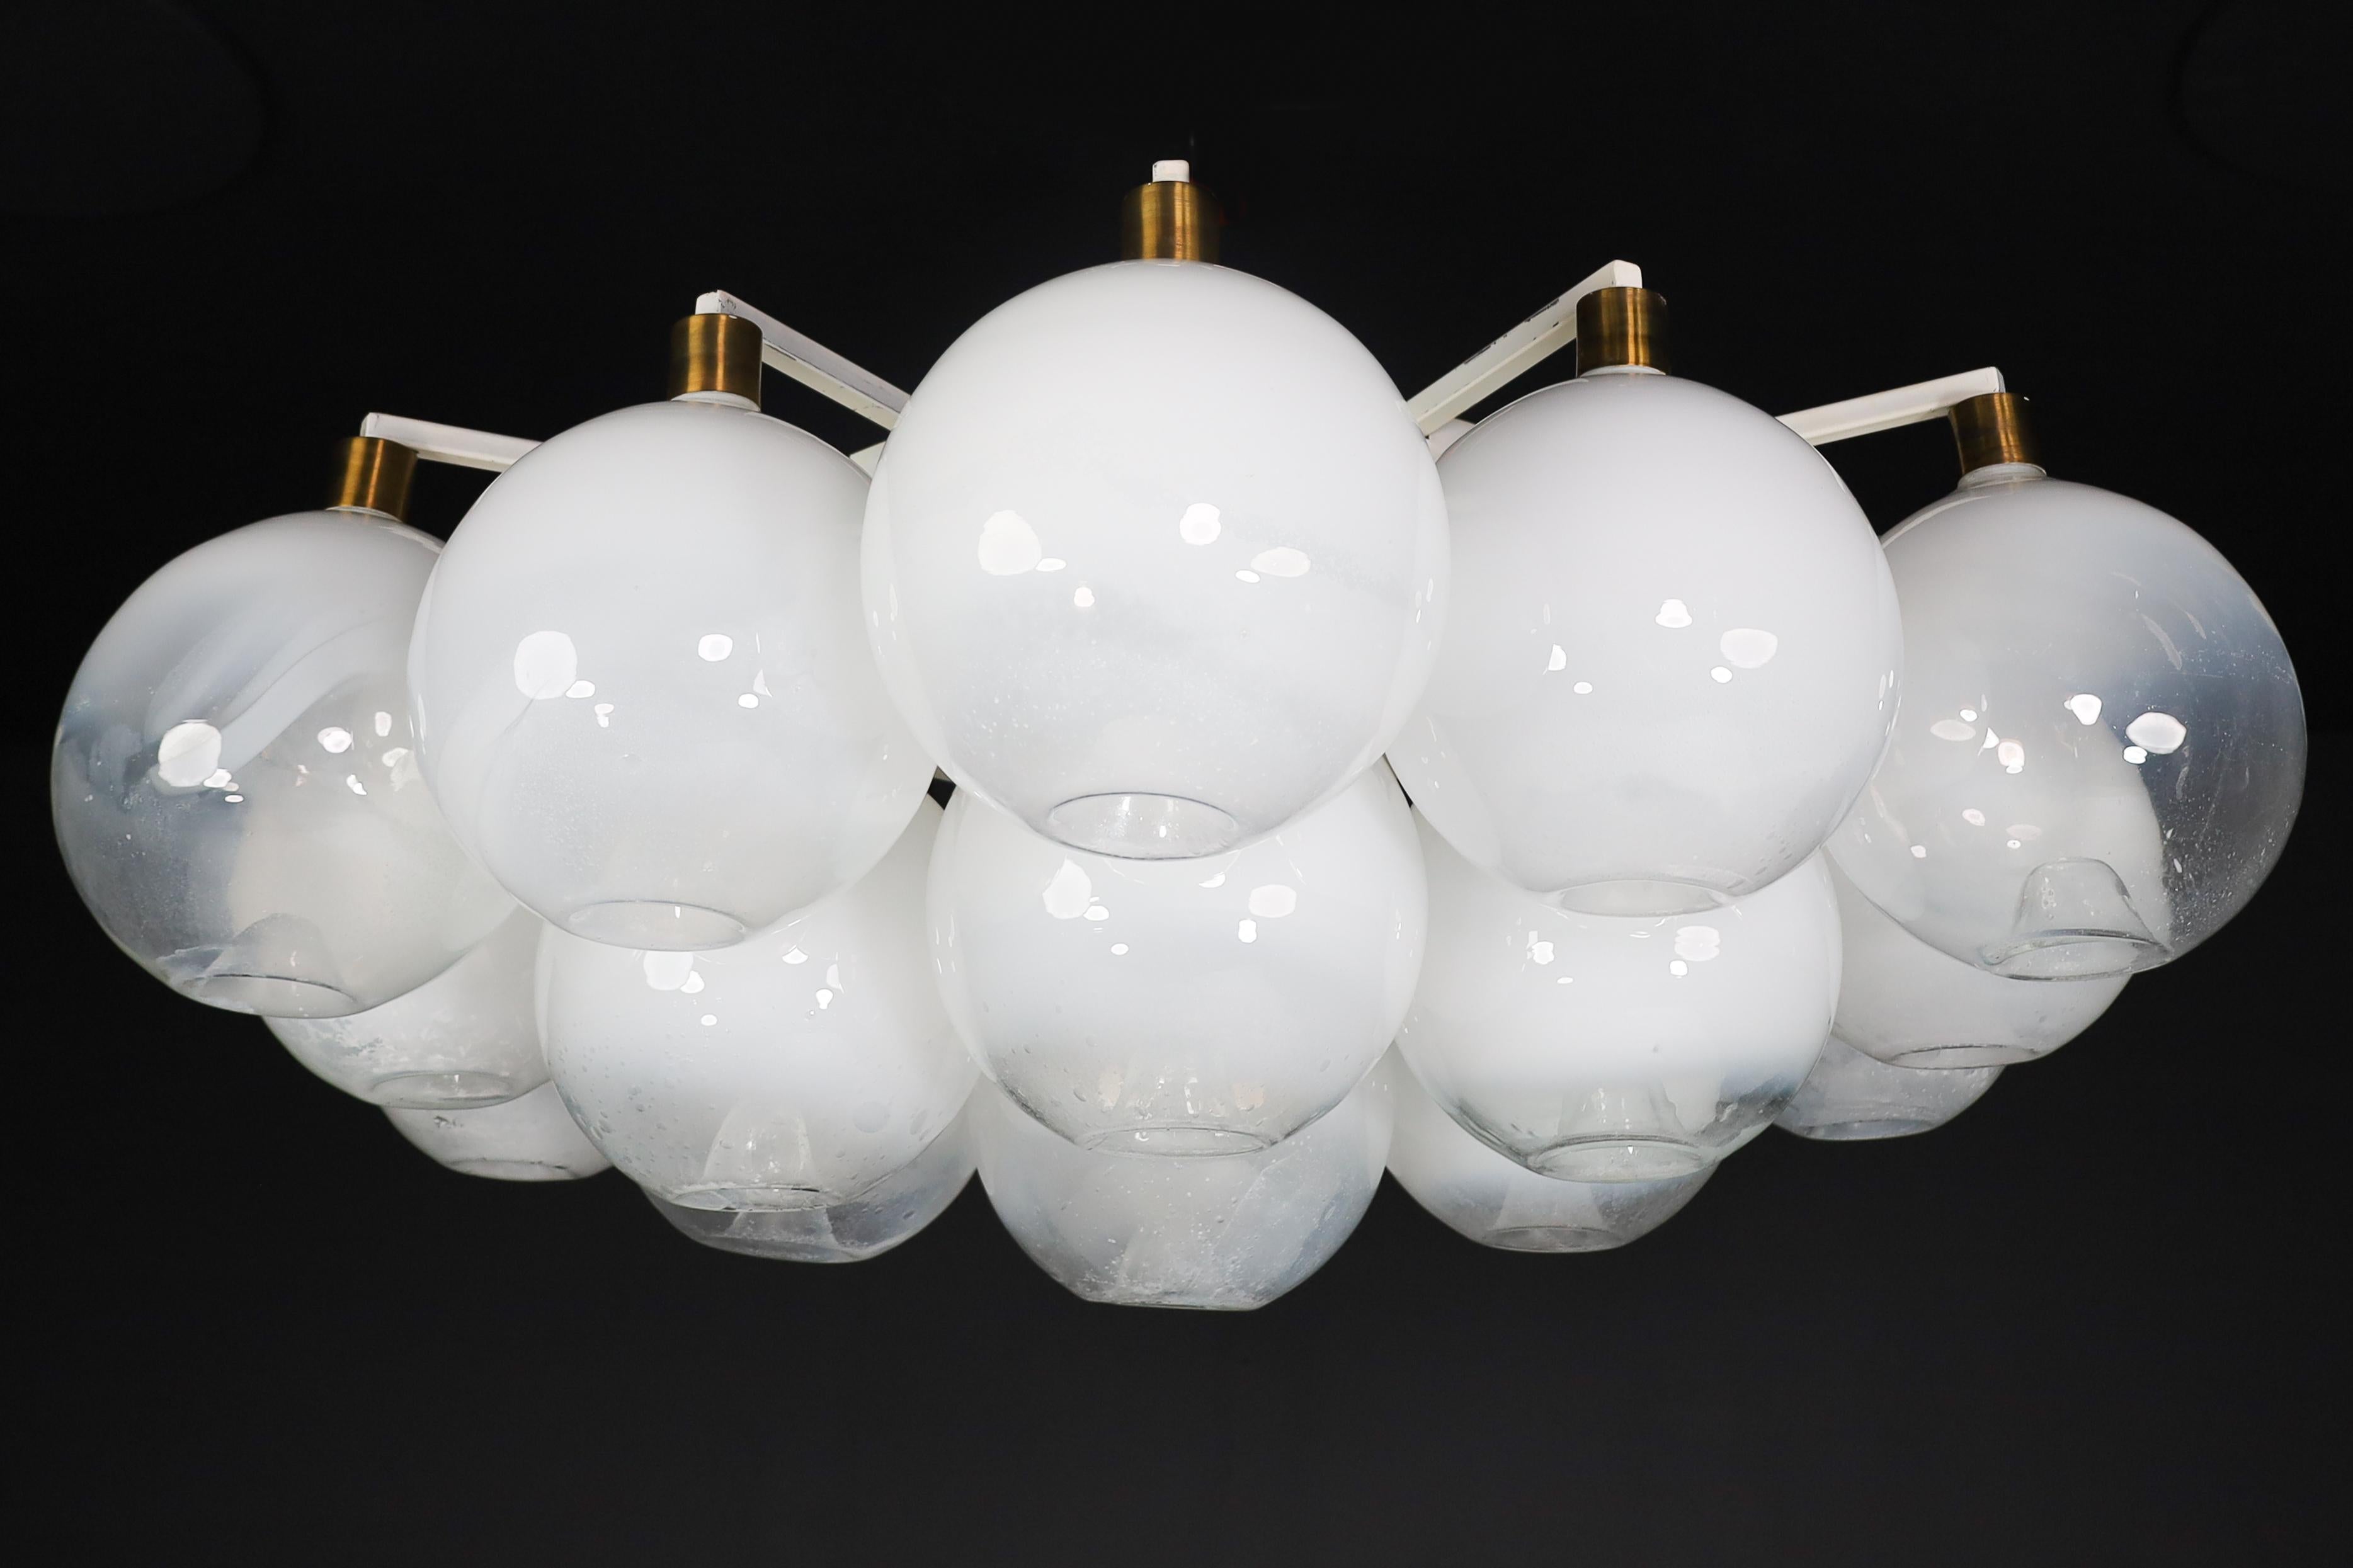 XL Flush Mount / Chandelier with Frosted Globes and Brass, Italy, 1960s

XL flush mount - chandelier (diameter 150 cm) with hand-blowed frosted glass globes with brass details, produced and designed in Italy in the 1960s. Nineteen large hand-blew